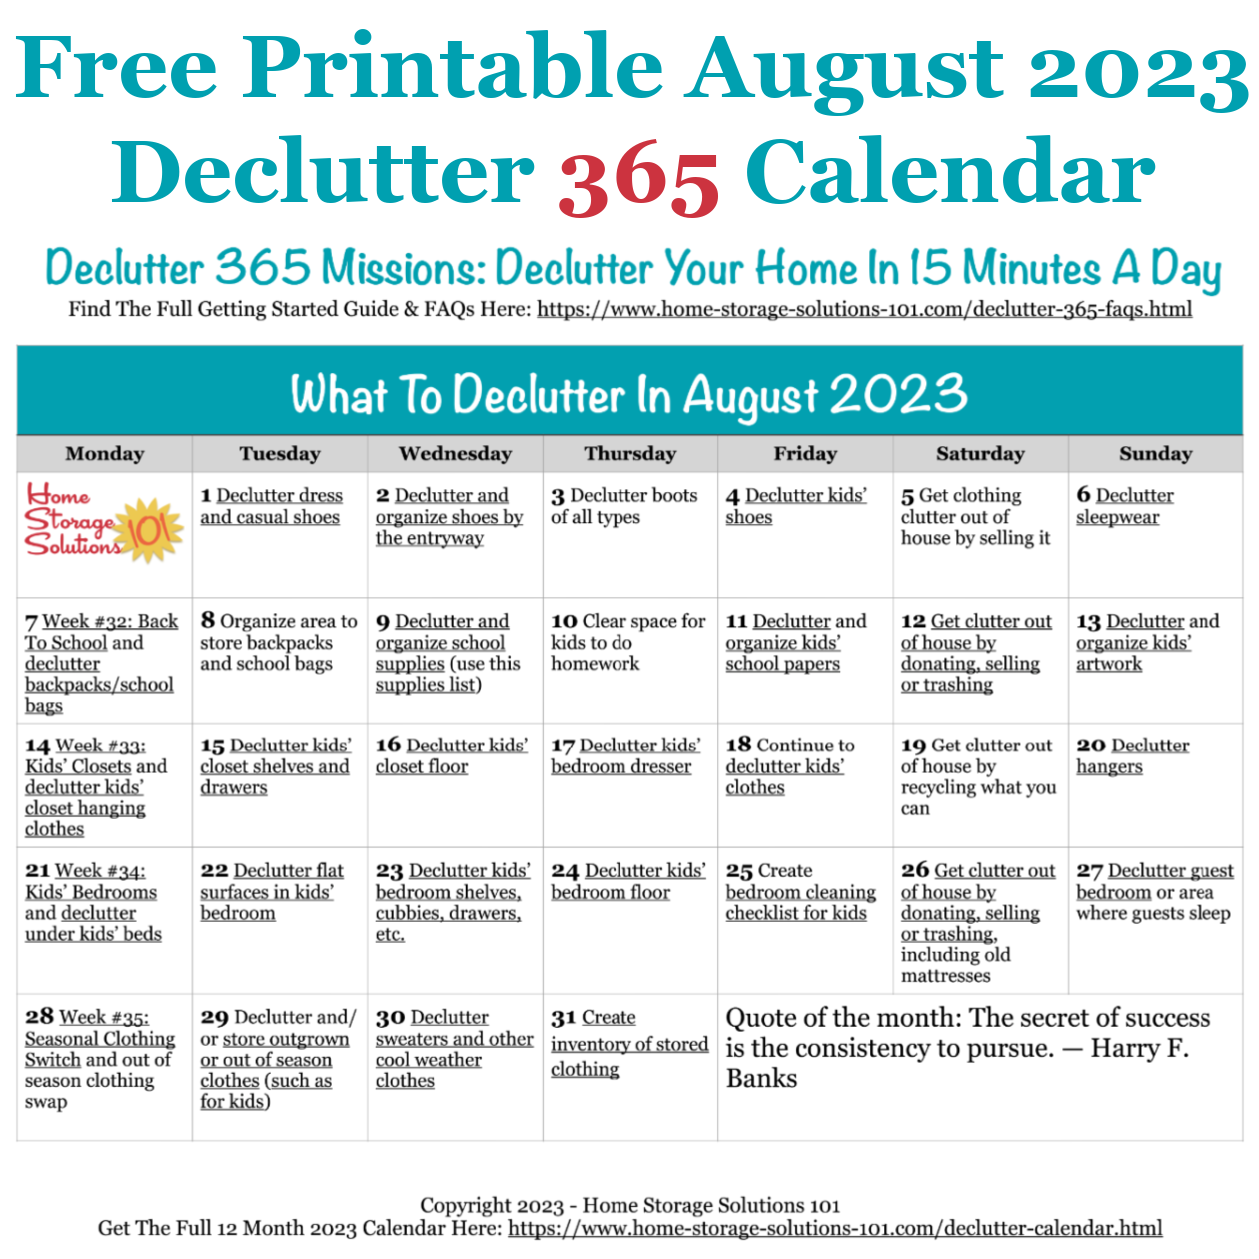 Free printable August 2023 decluttering calendar with daily 15 minute missions. Follow the entire Declutter 365 plan provided by Home Storage Solutions 101 to declutter your whole house in a year. #Declutter365 #Decluttering #Declutter